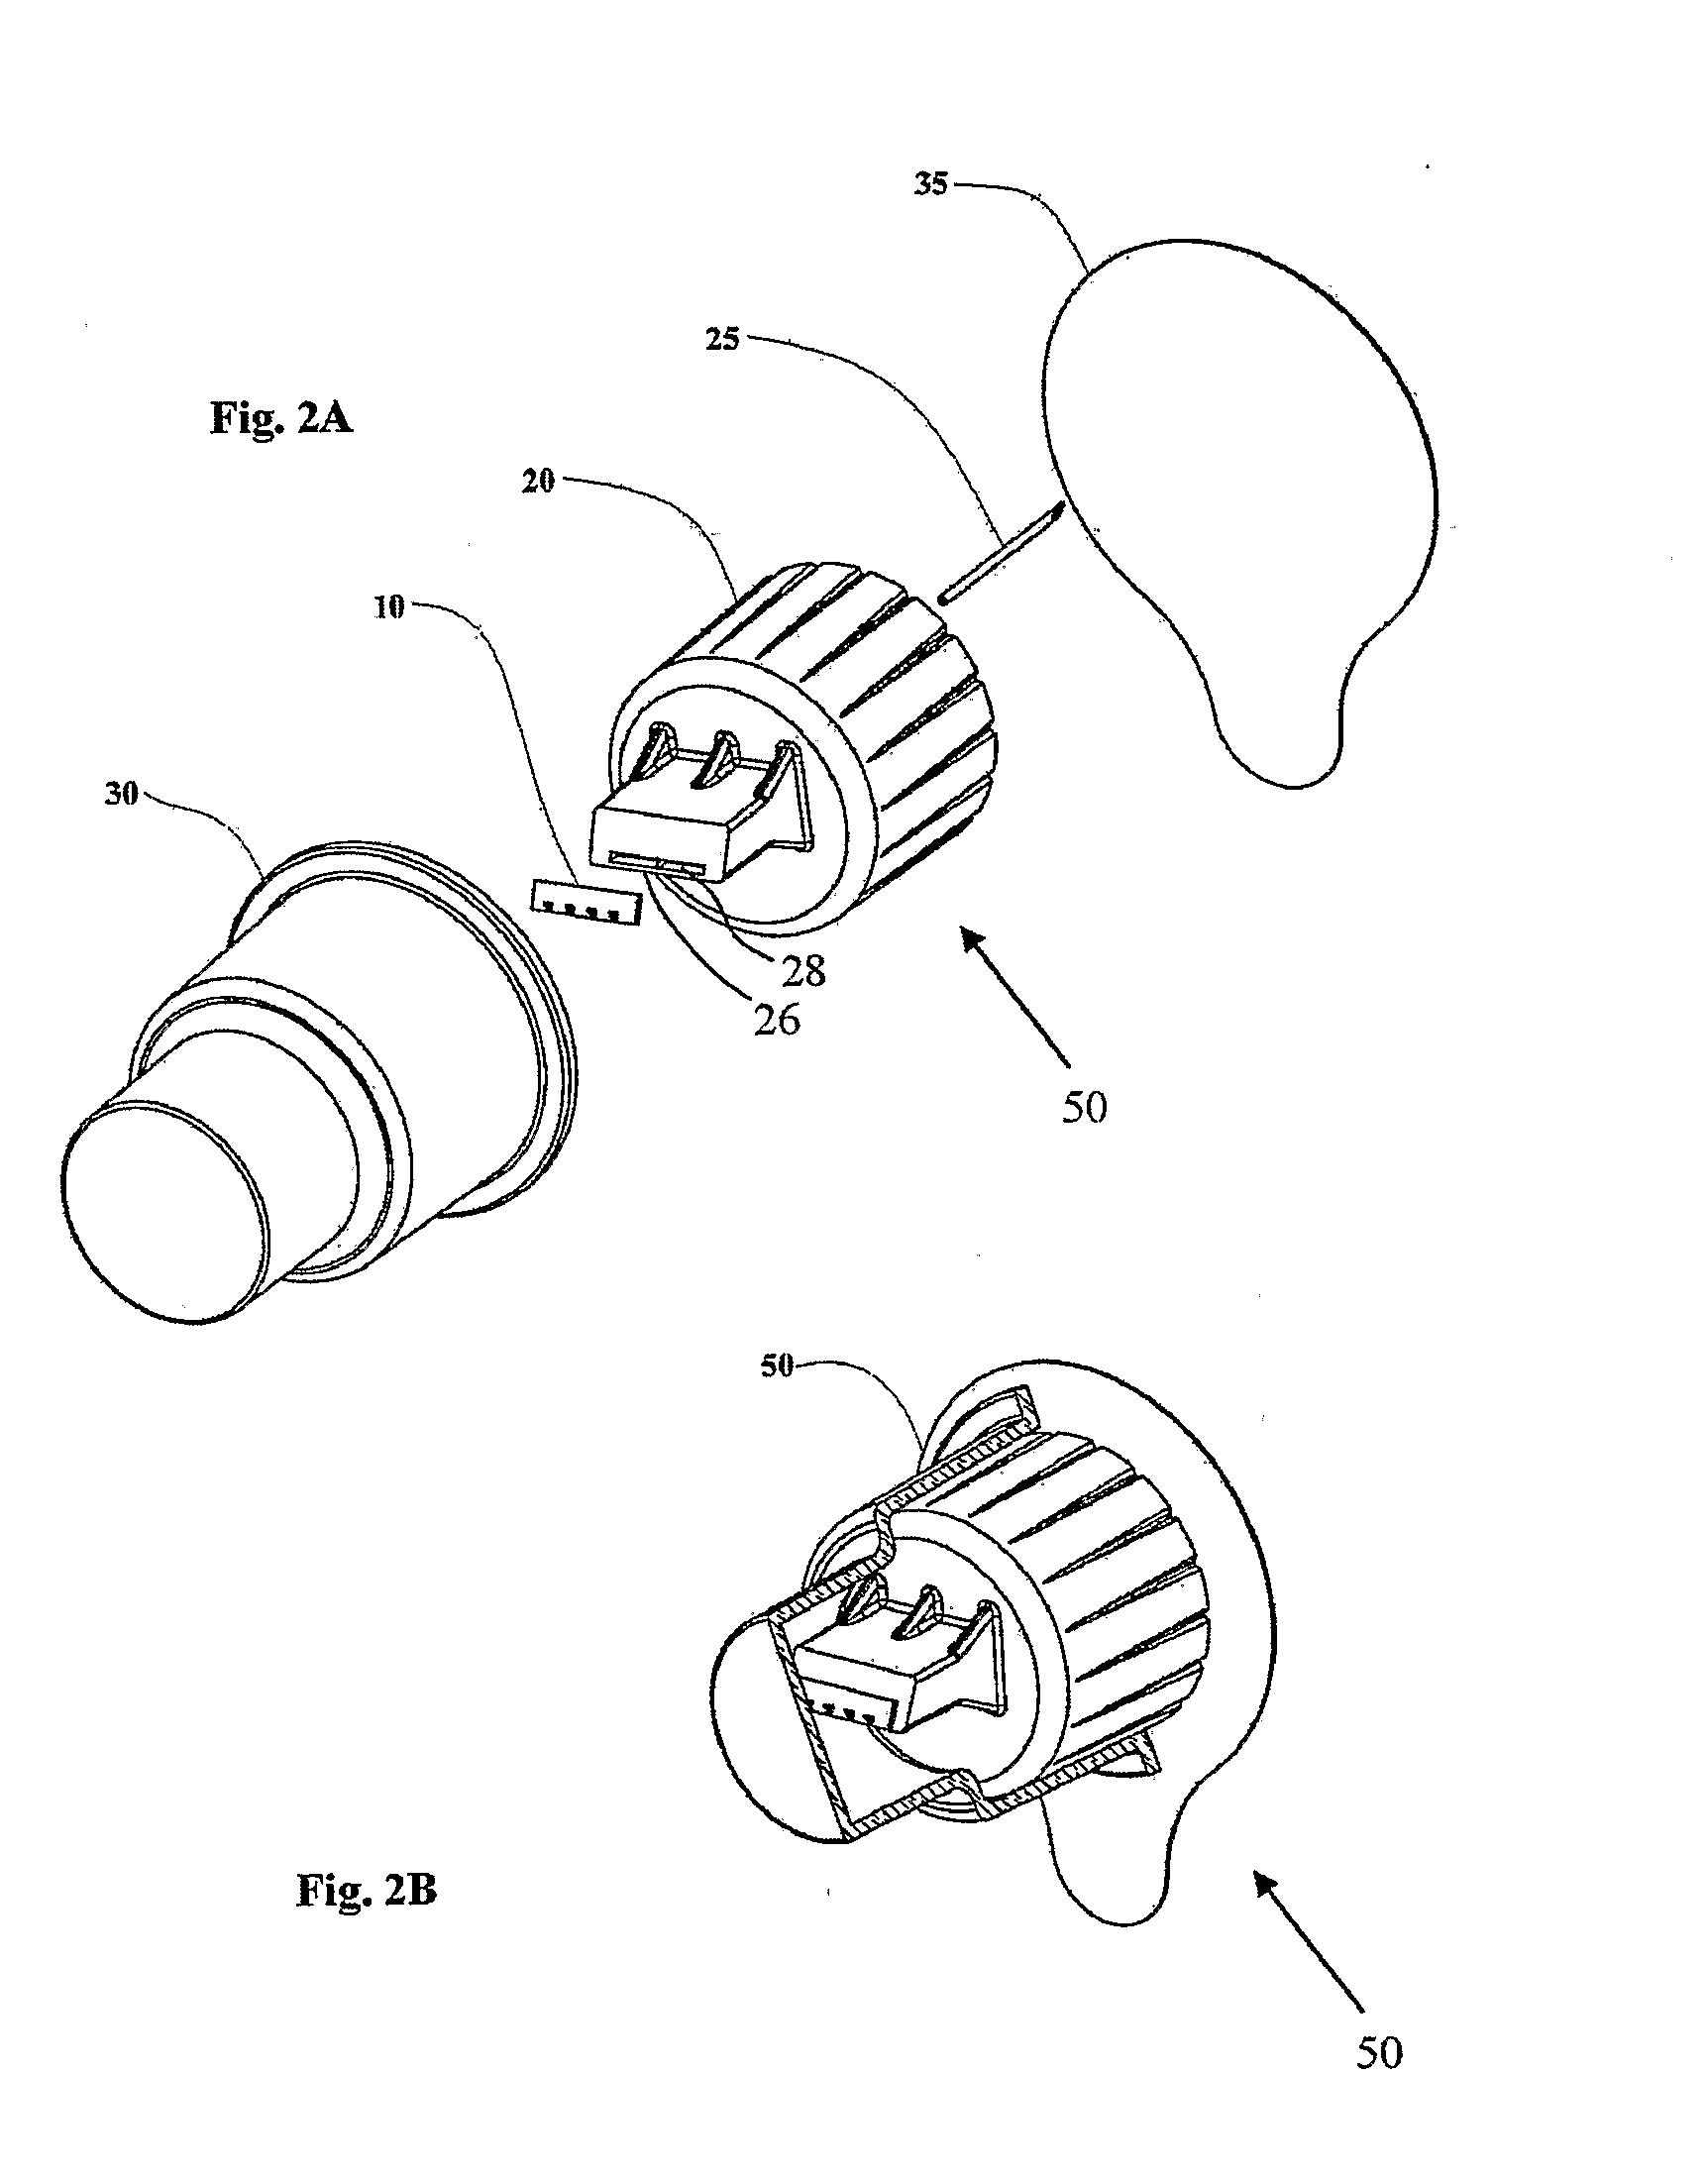 Microneedle adaptor for dosed drug delivery devices